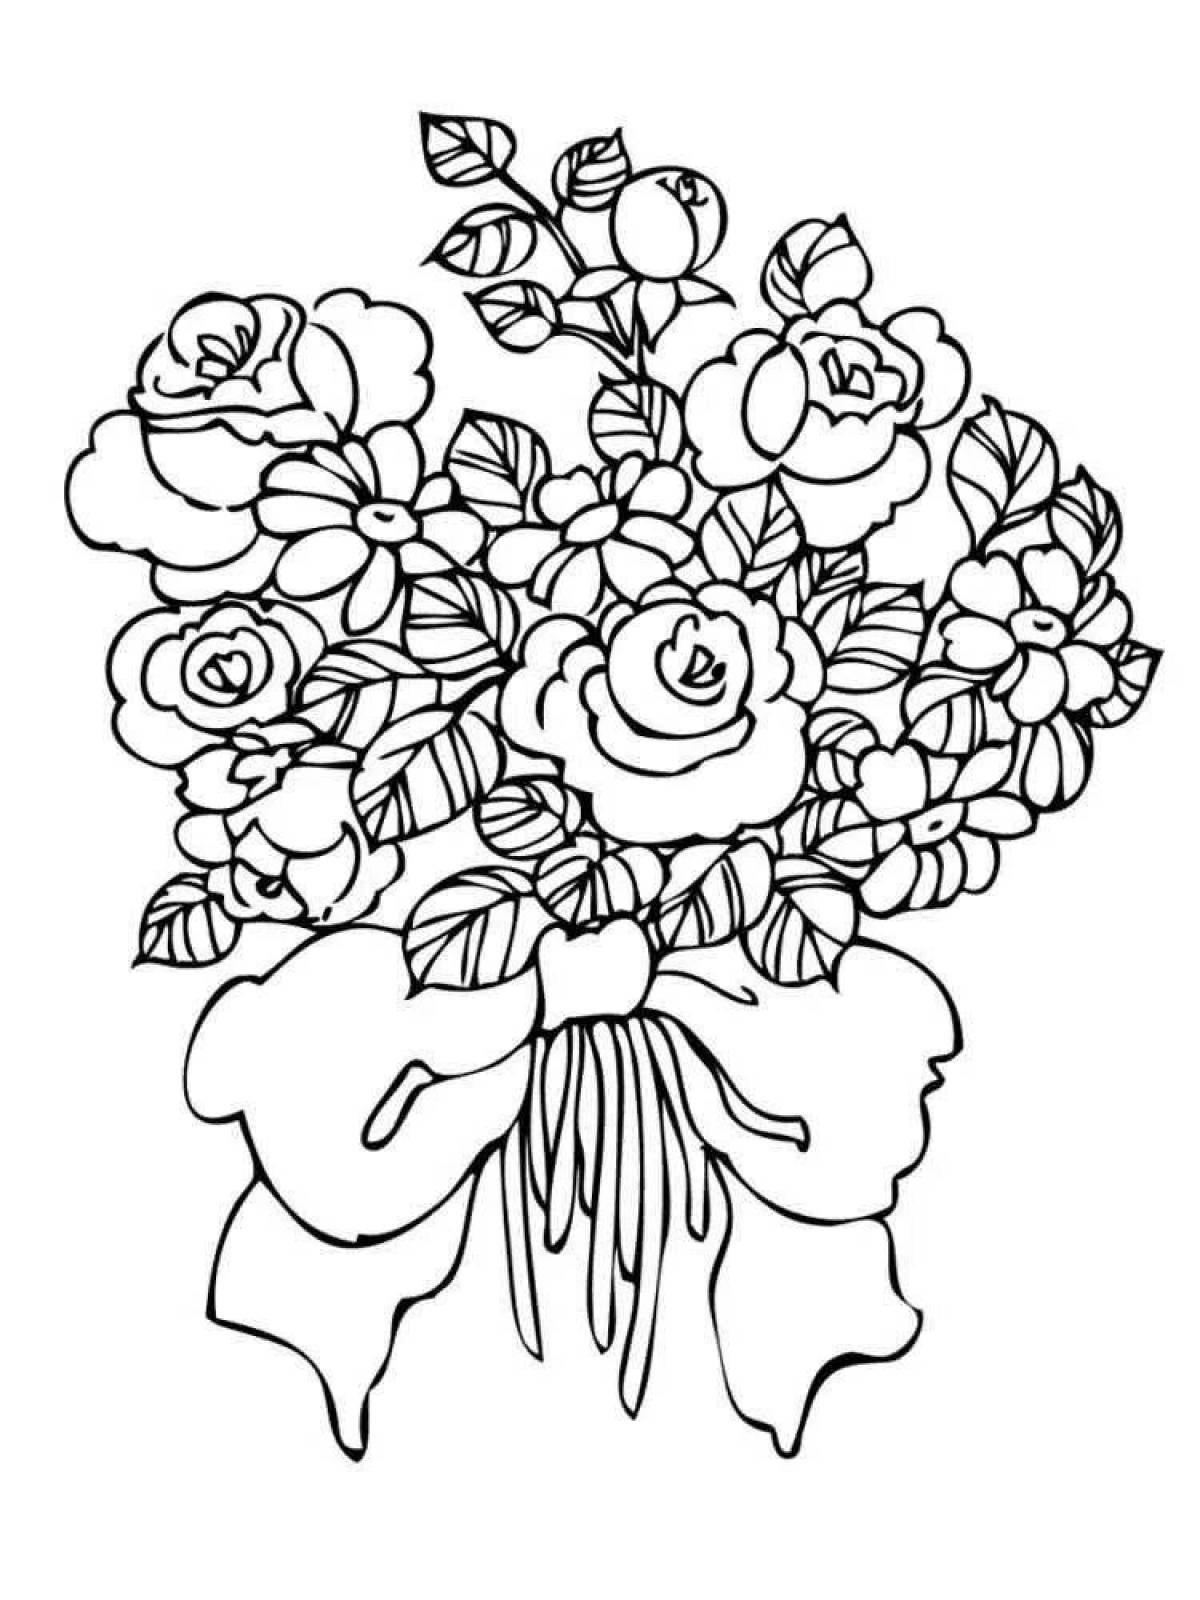 Delightful coloring beautiful large bouquets of flowers